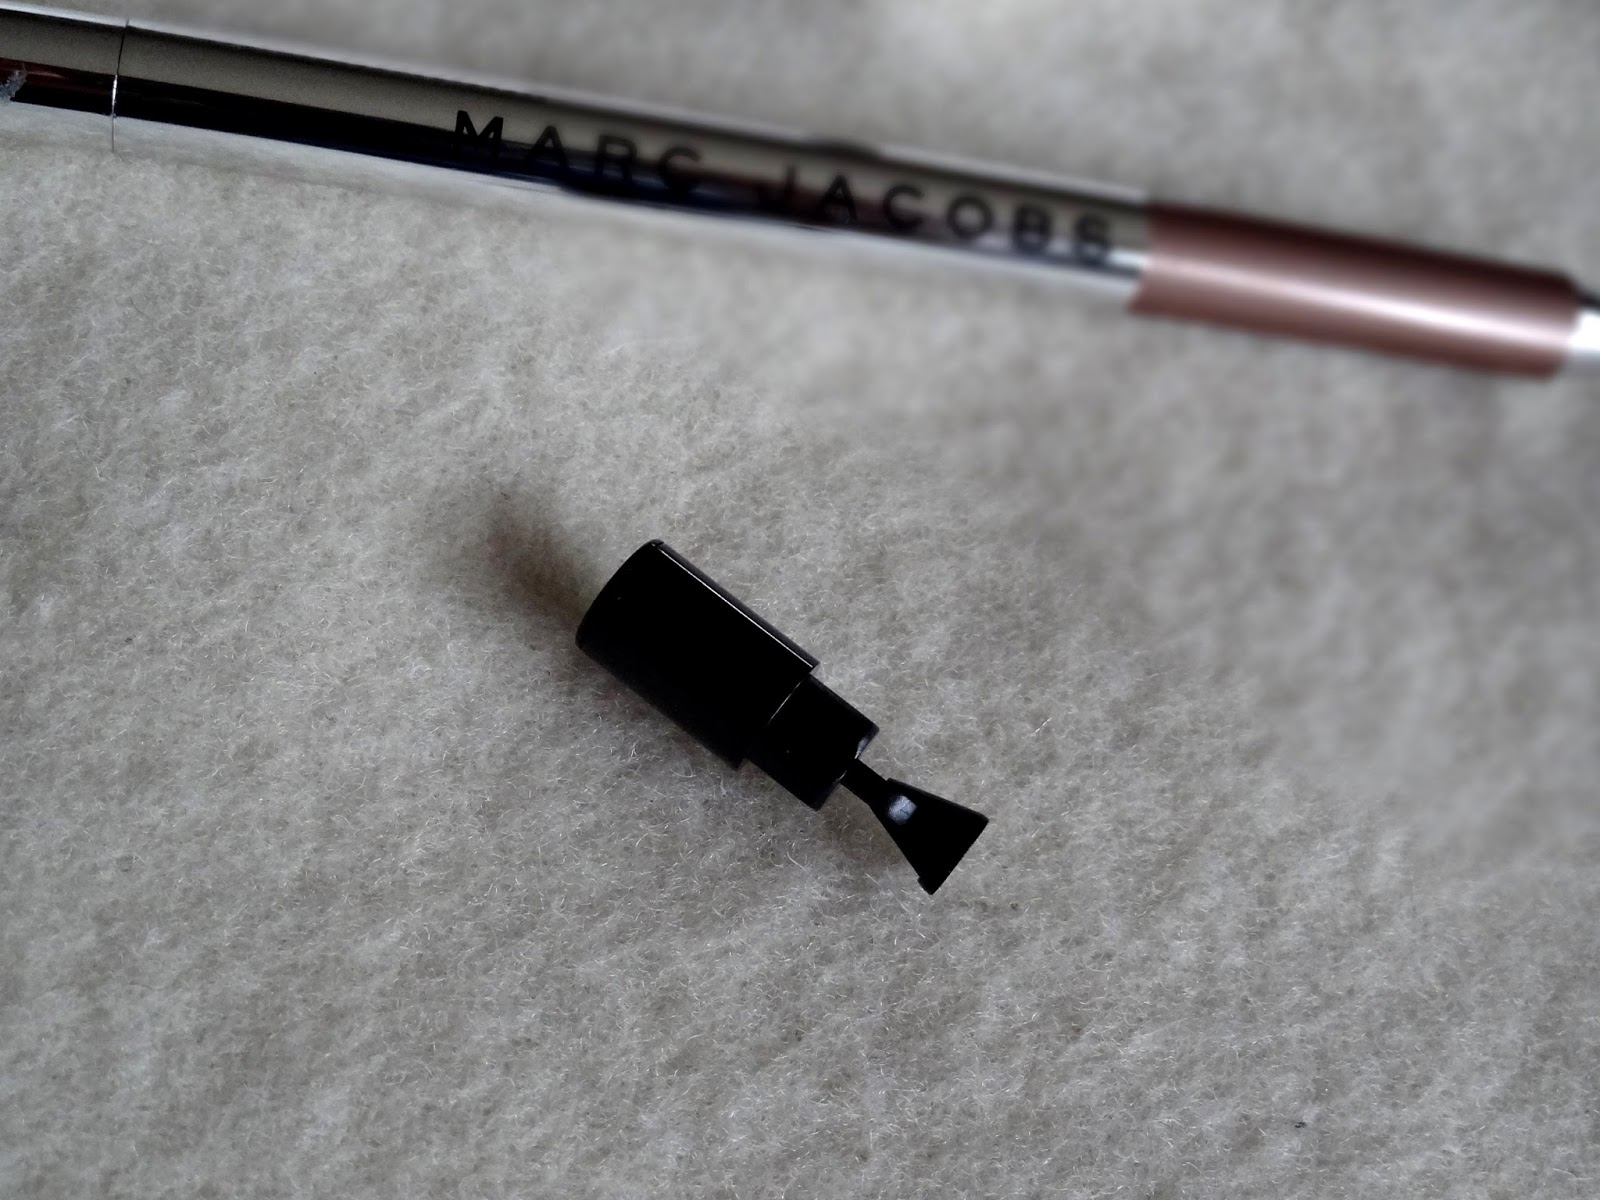 Marc Jacobs Beauty Highliner Gel Eye Crayon in Ro(Cocoa) Review, photos & Swatches